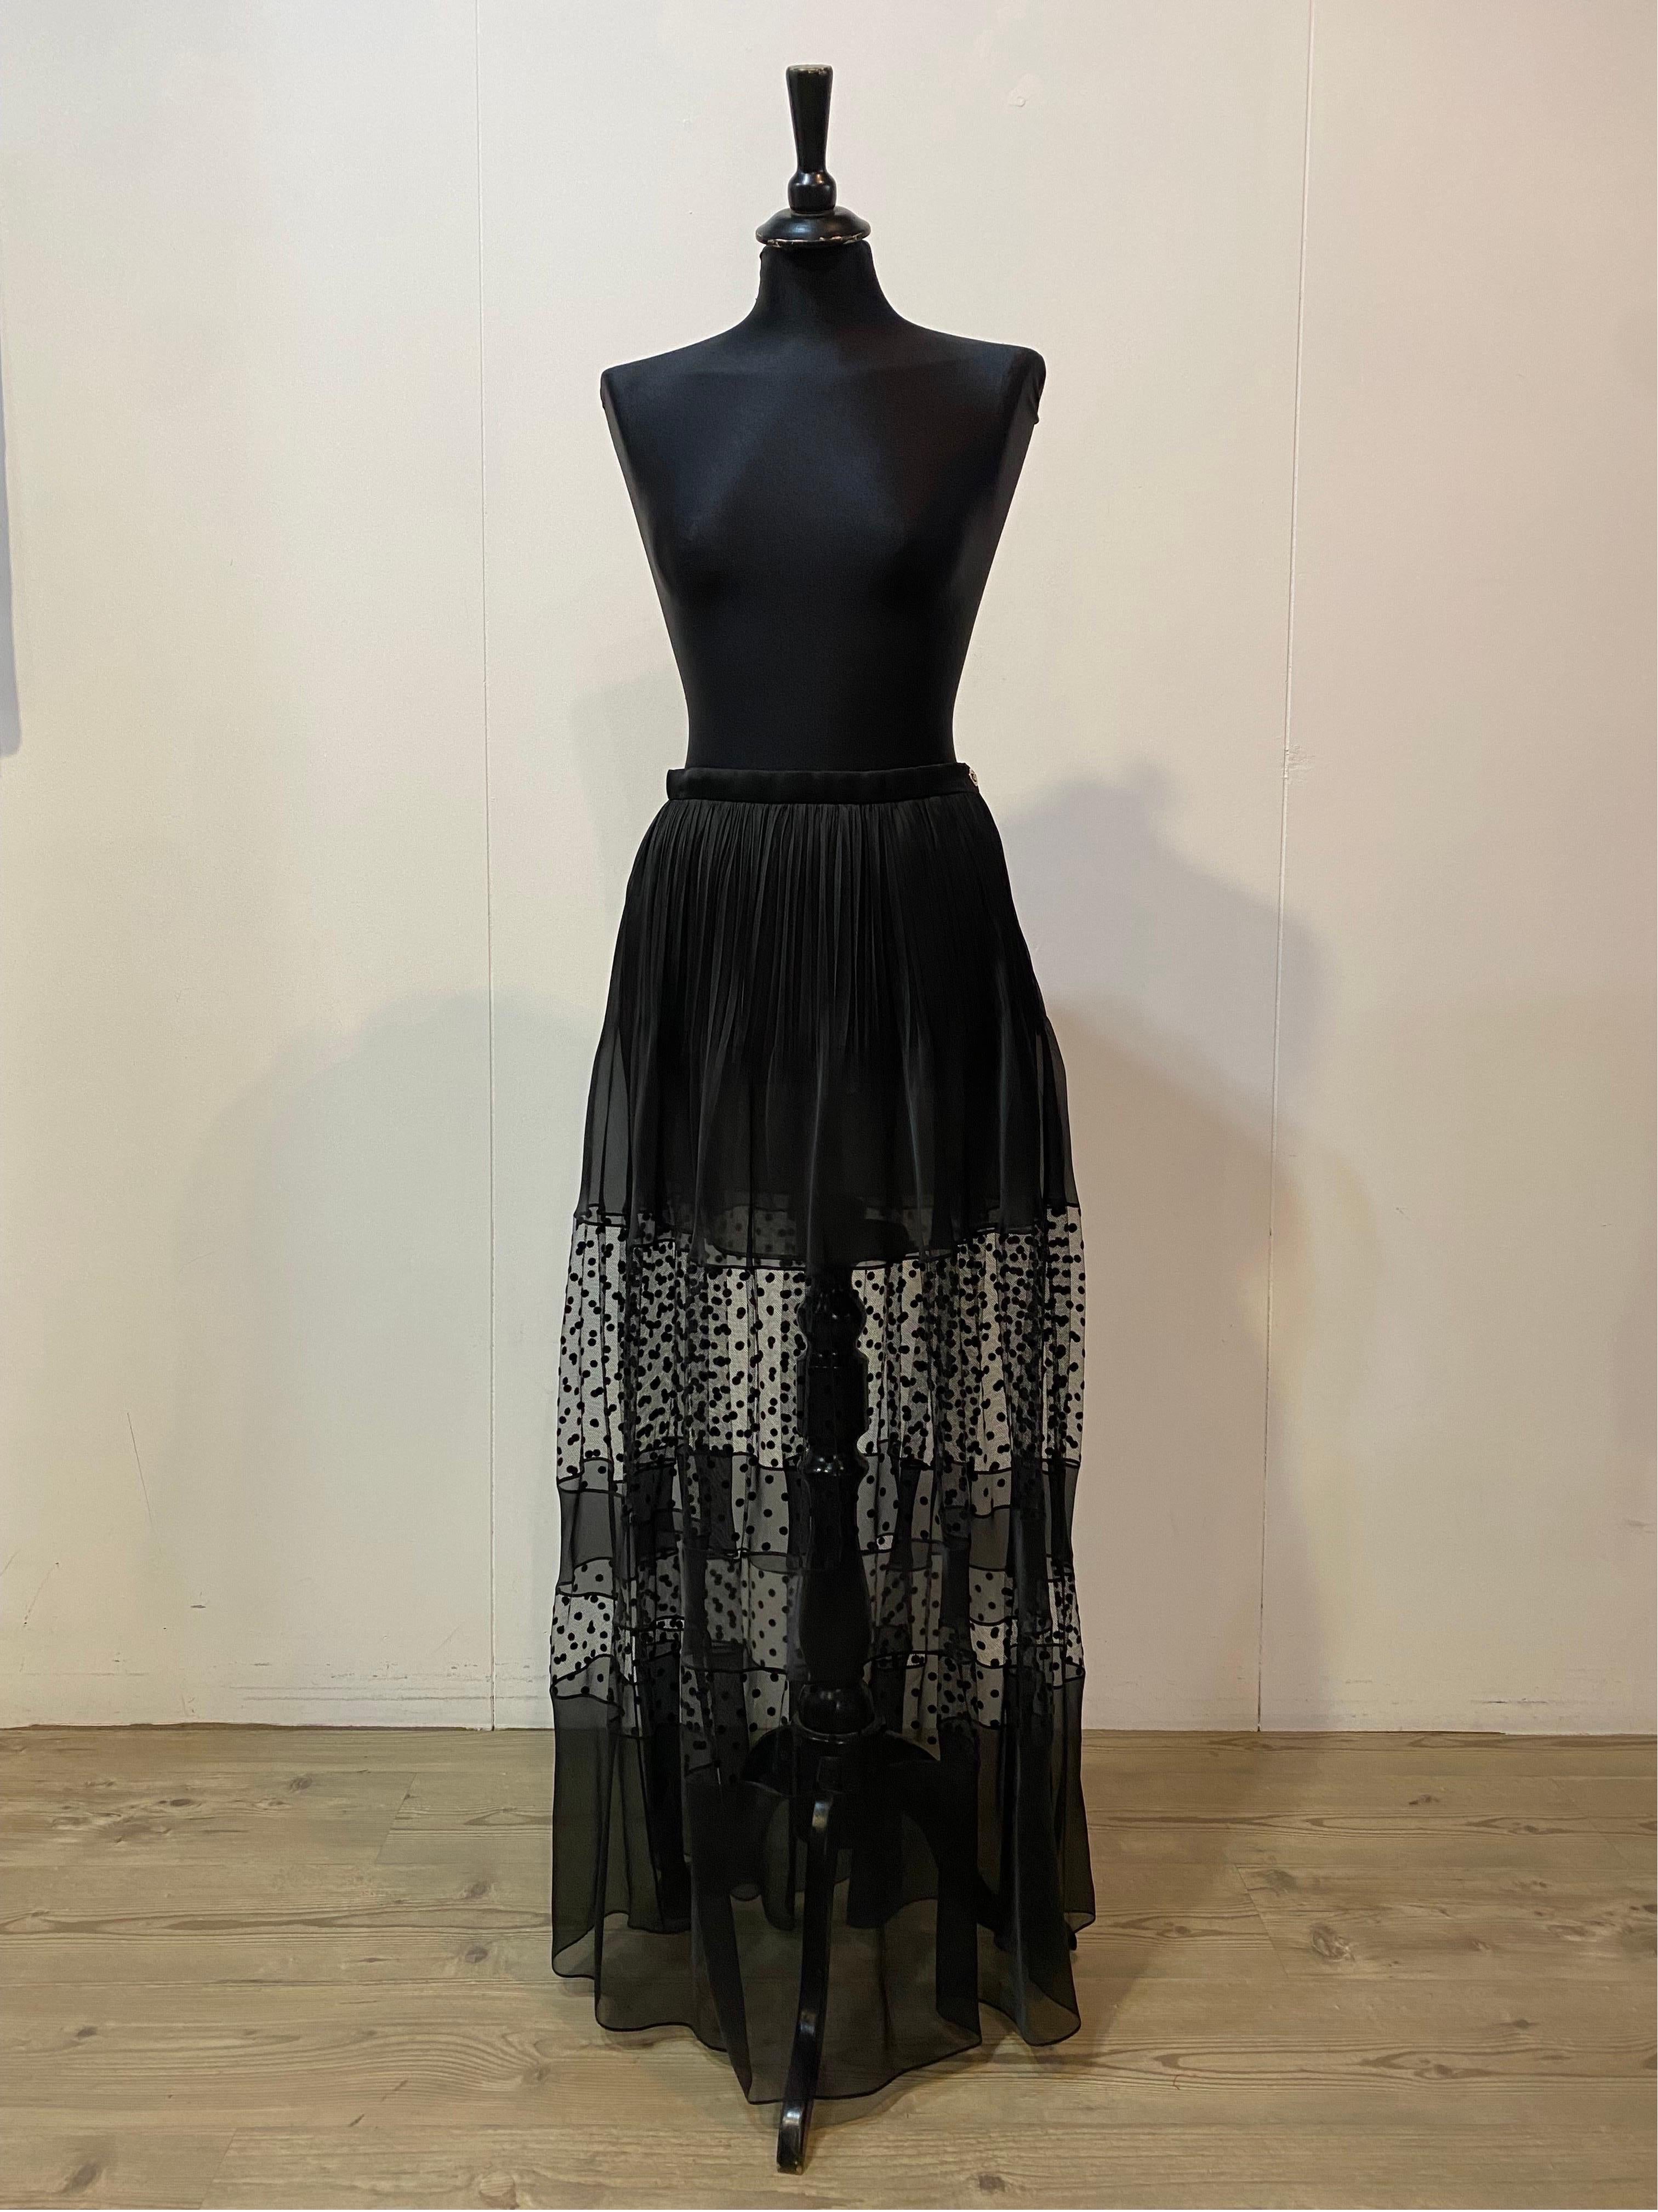 Long Chanel skirt with transparencies.
Very nice details.
Made of 100% silk. Lined.
Side zip and branded button closure.
Size 36 fr which corresponds to an Italian 40.
Waist 35cm
Length 112 cm
Excellent general conditions. Like New.